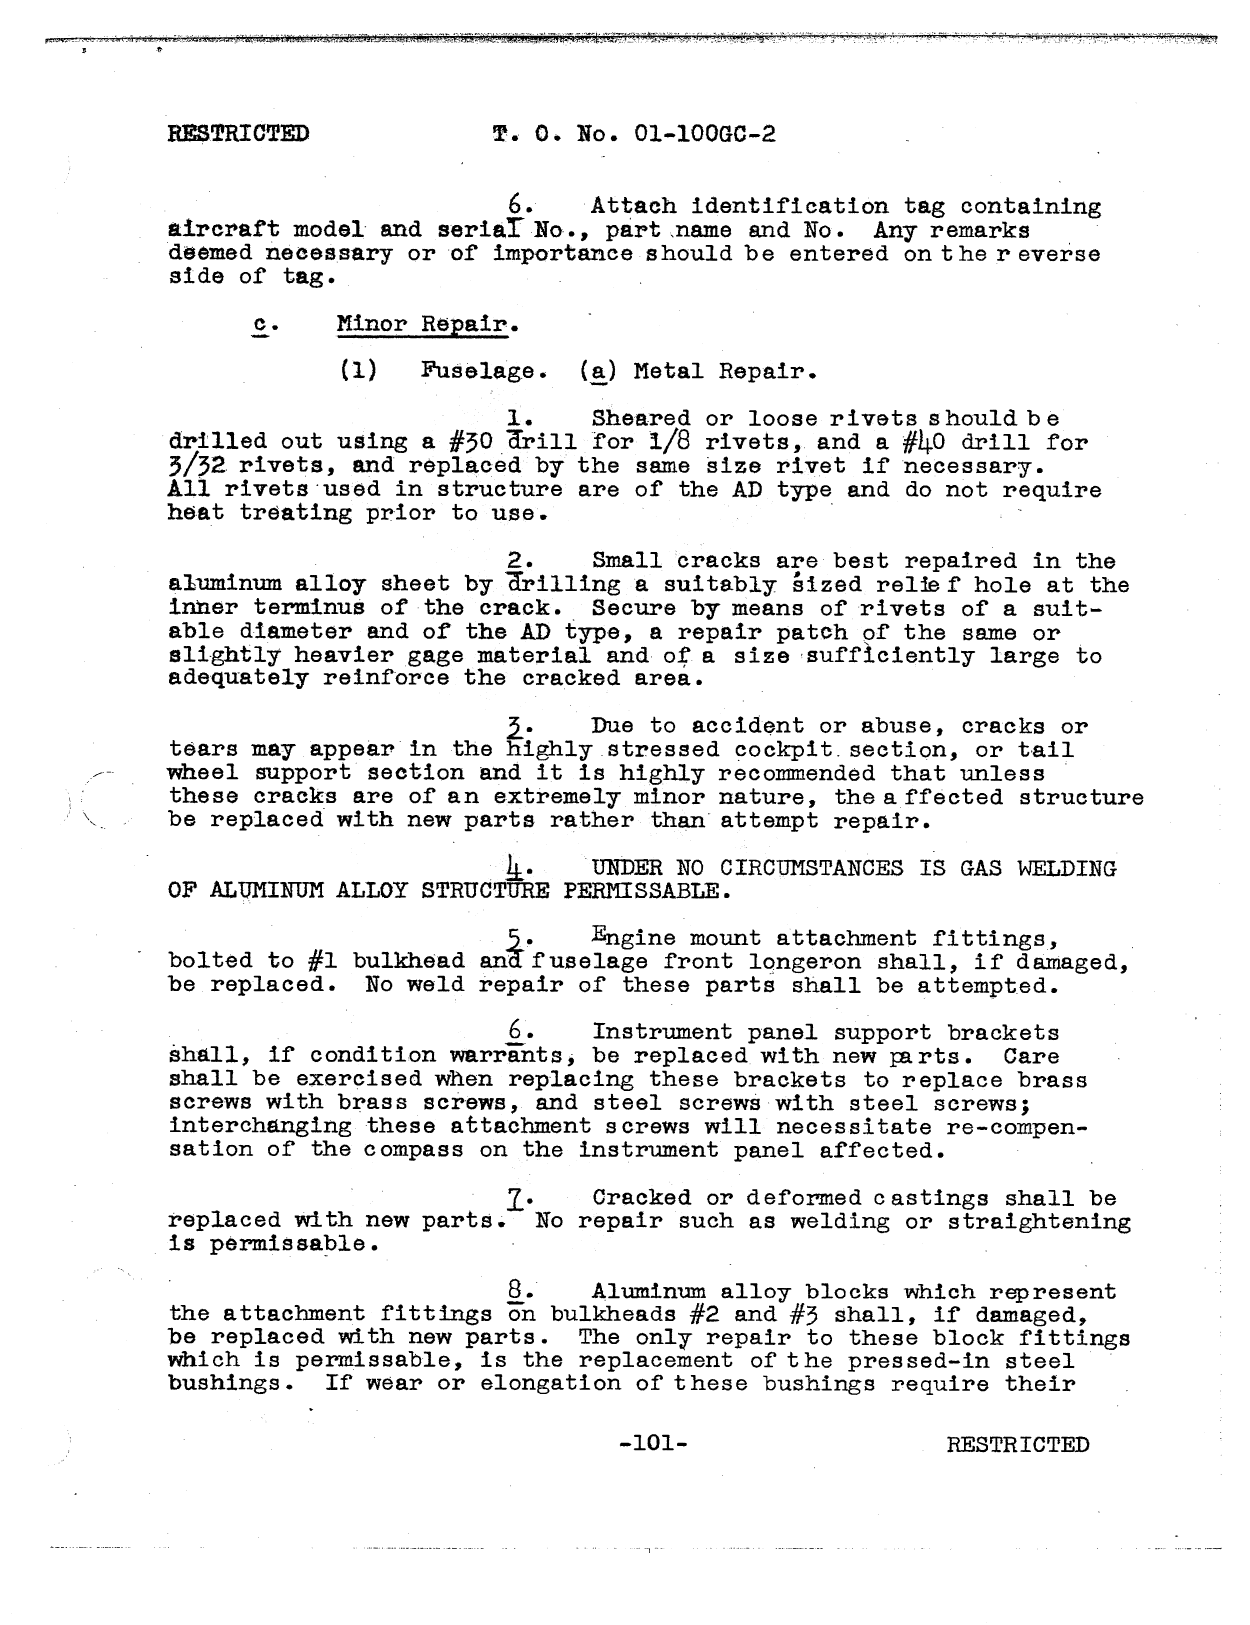 Sample page 99 from AirCorps Library document: Service Instructions - PT-21, PT-22